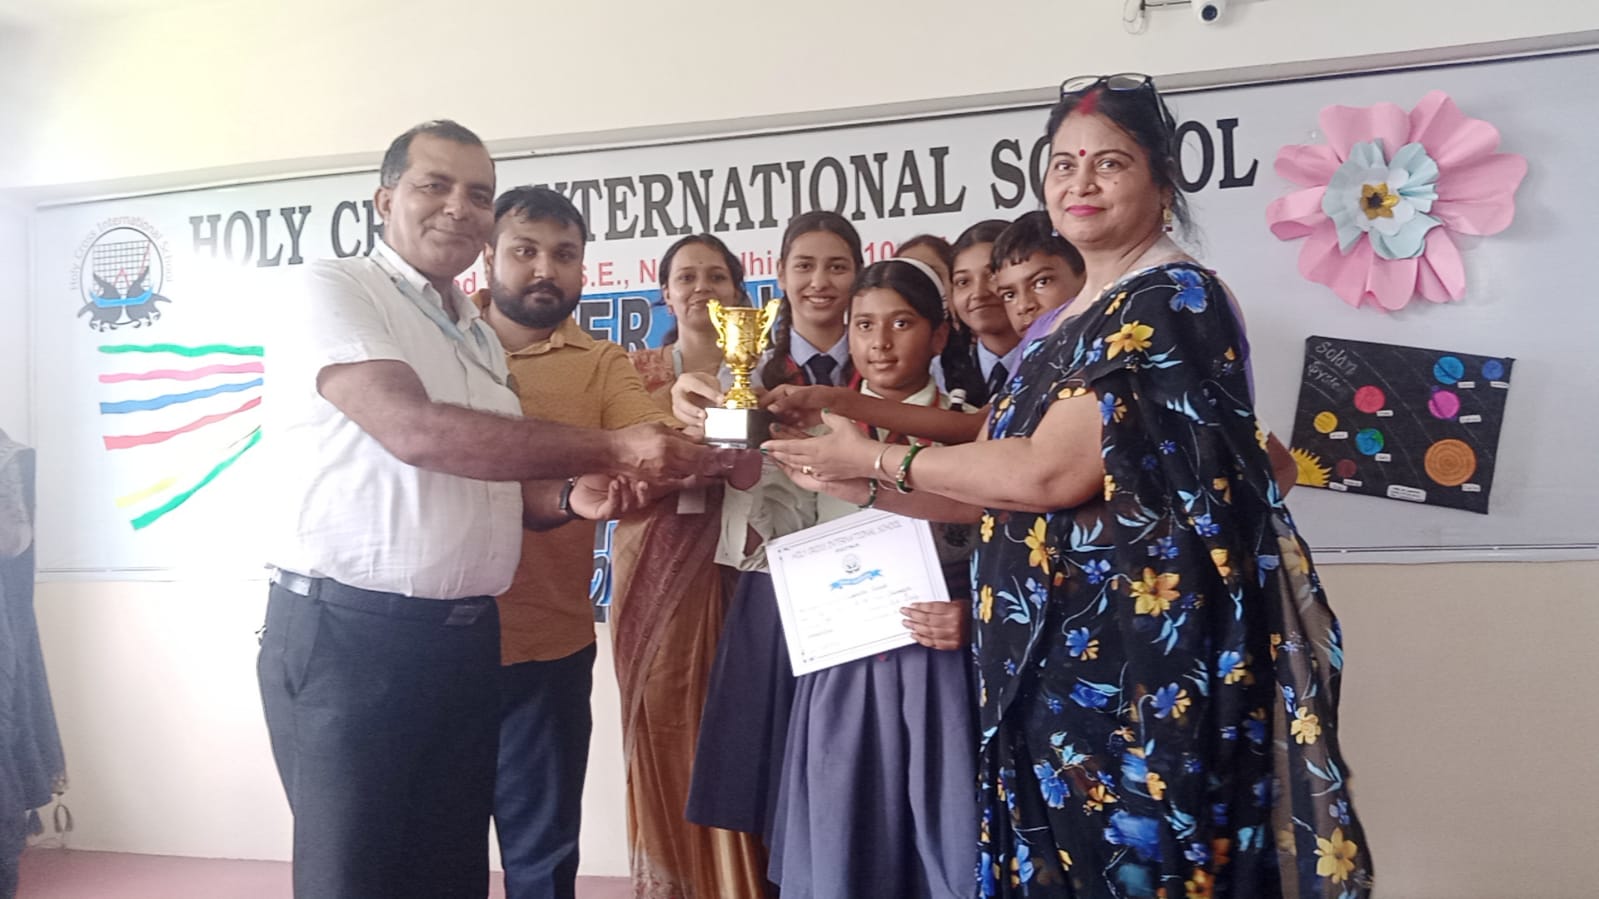 INTER HOUSE QUIZ COMPETITION WINNER (CHANAKYA HOUSE)